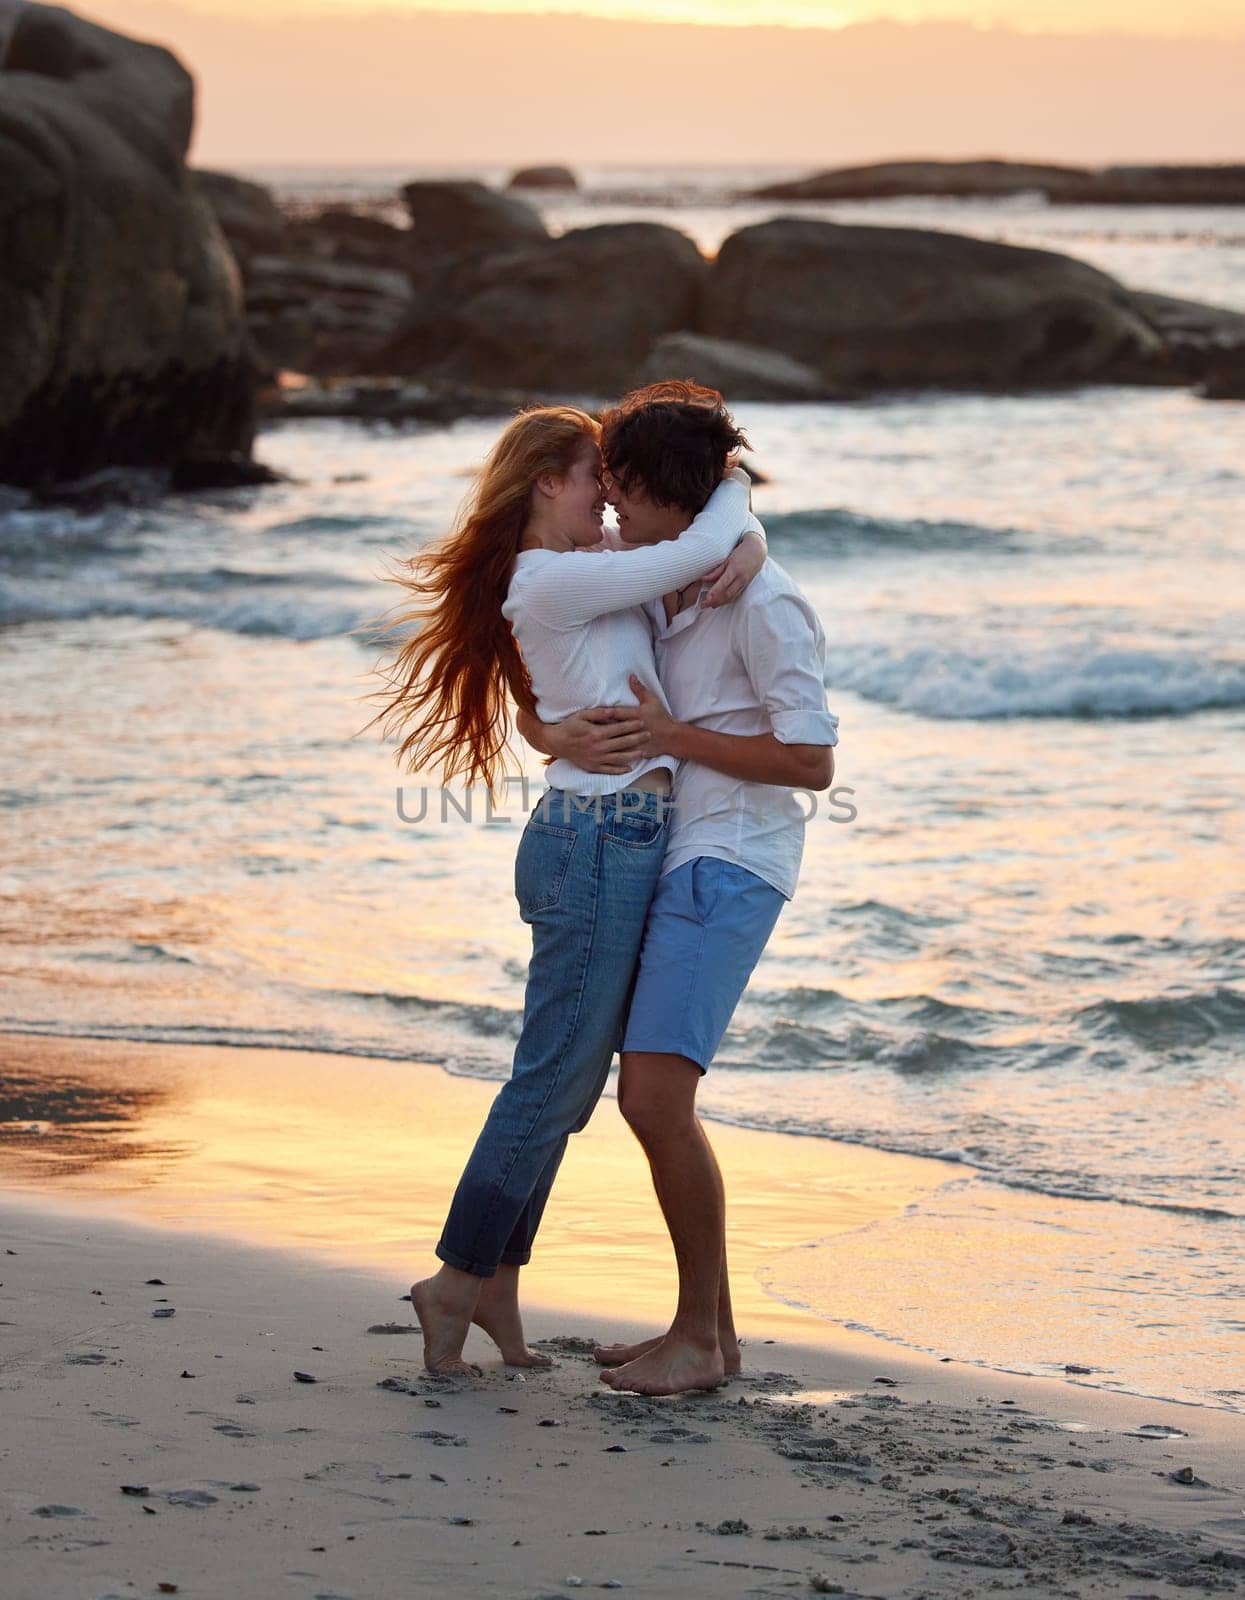 Couple hug on beach, freedom and travel, love and commitment in relationship, adventure and vacation. Trust, partnership and care with people outdoor, romance and happiness at sunset with sea waves.